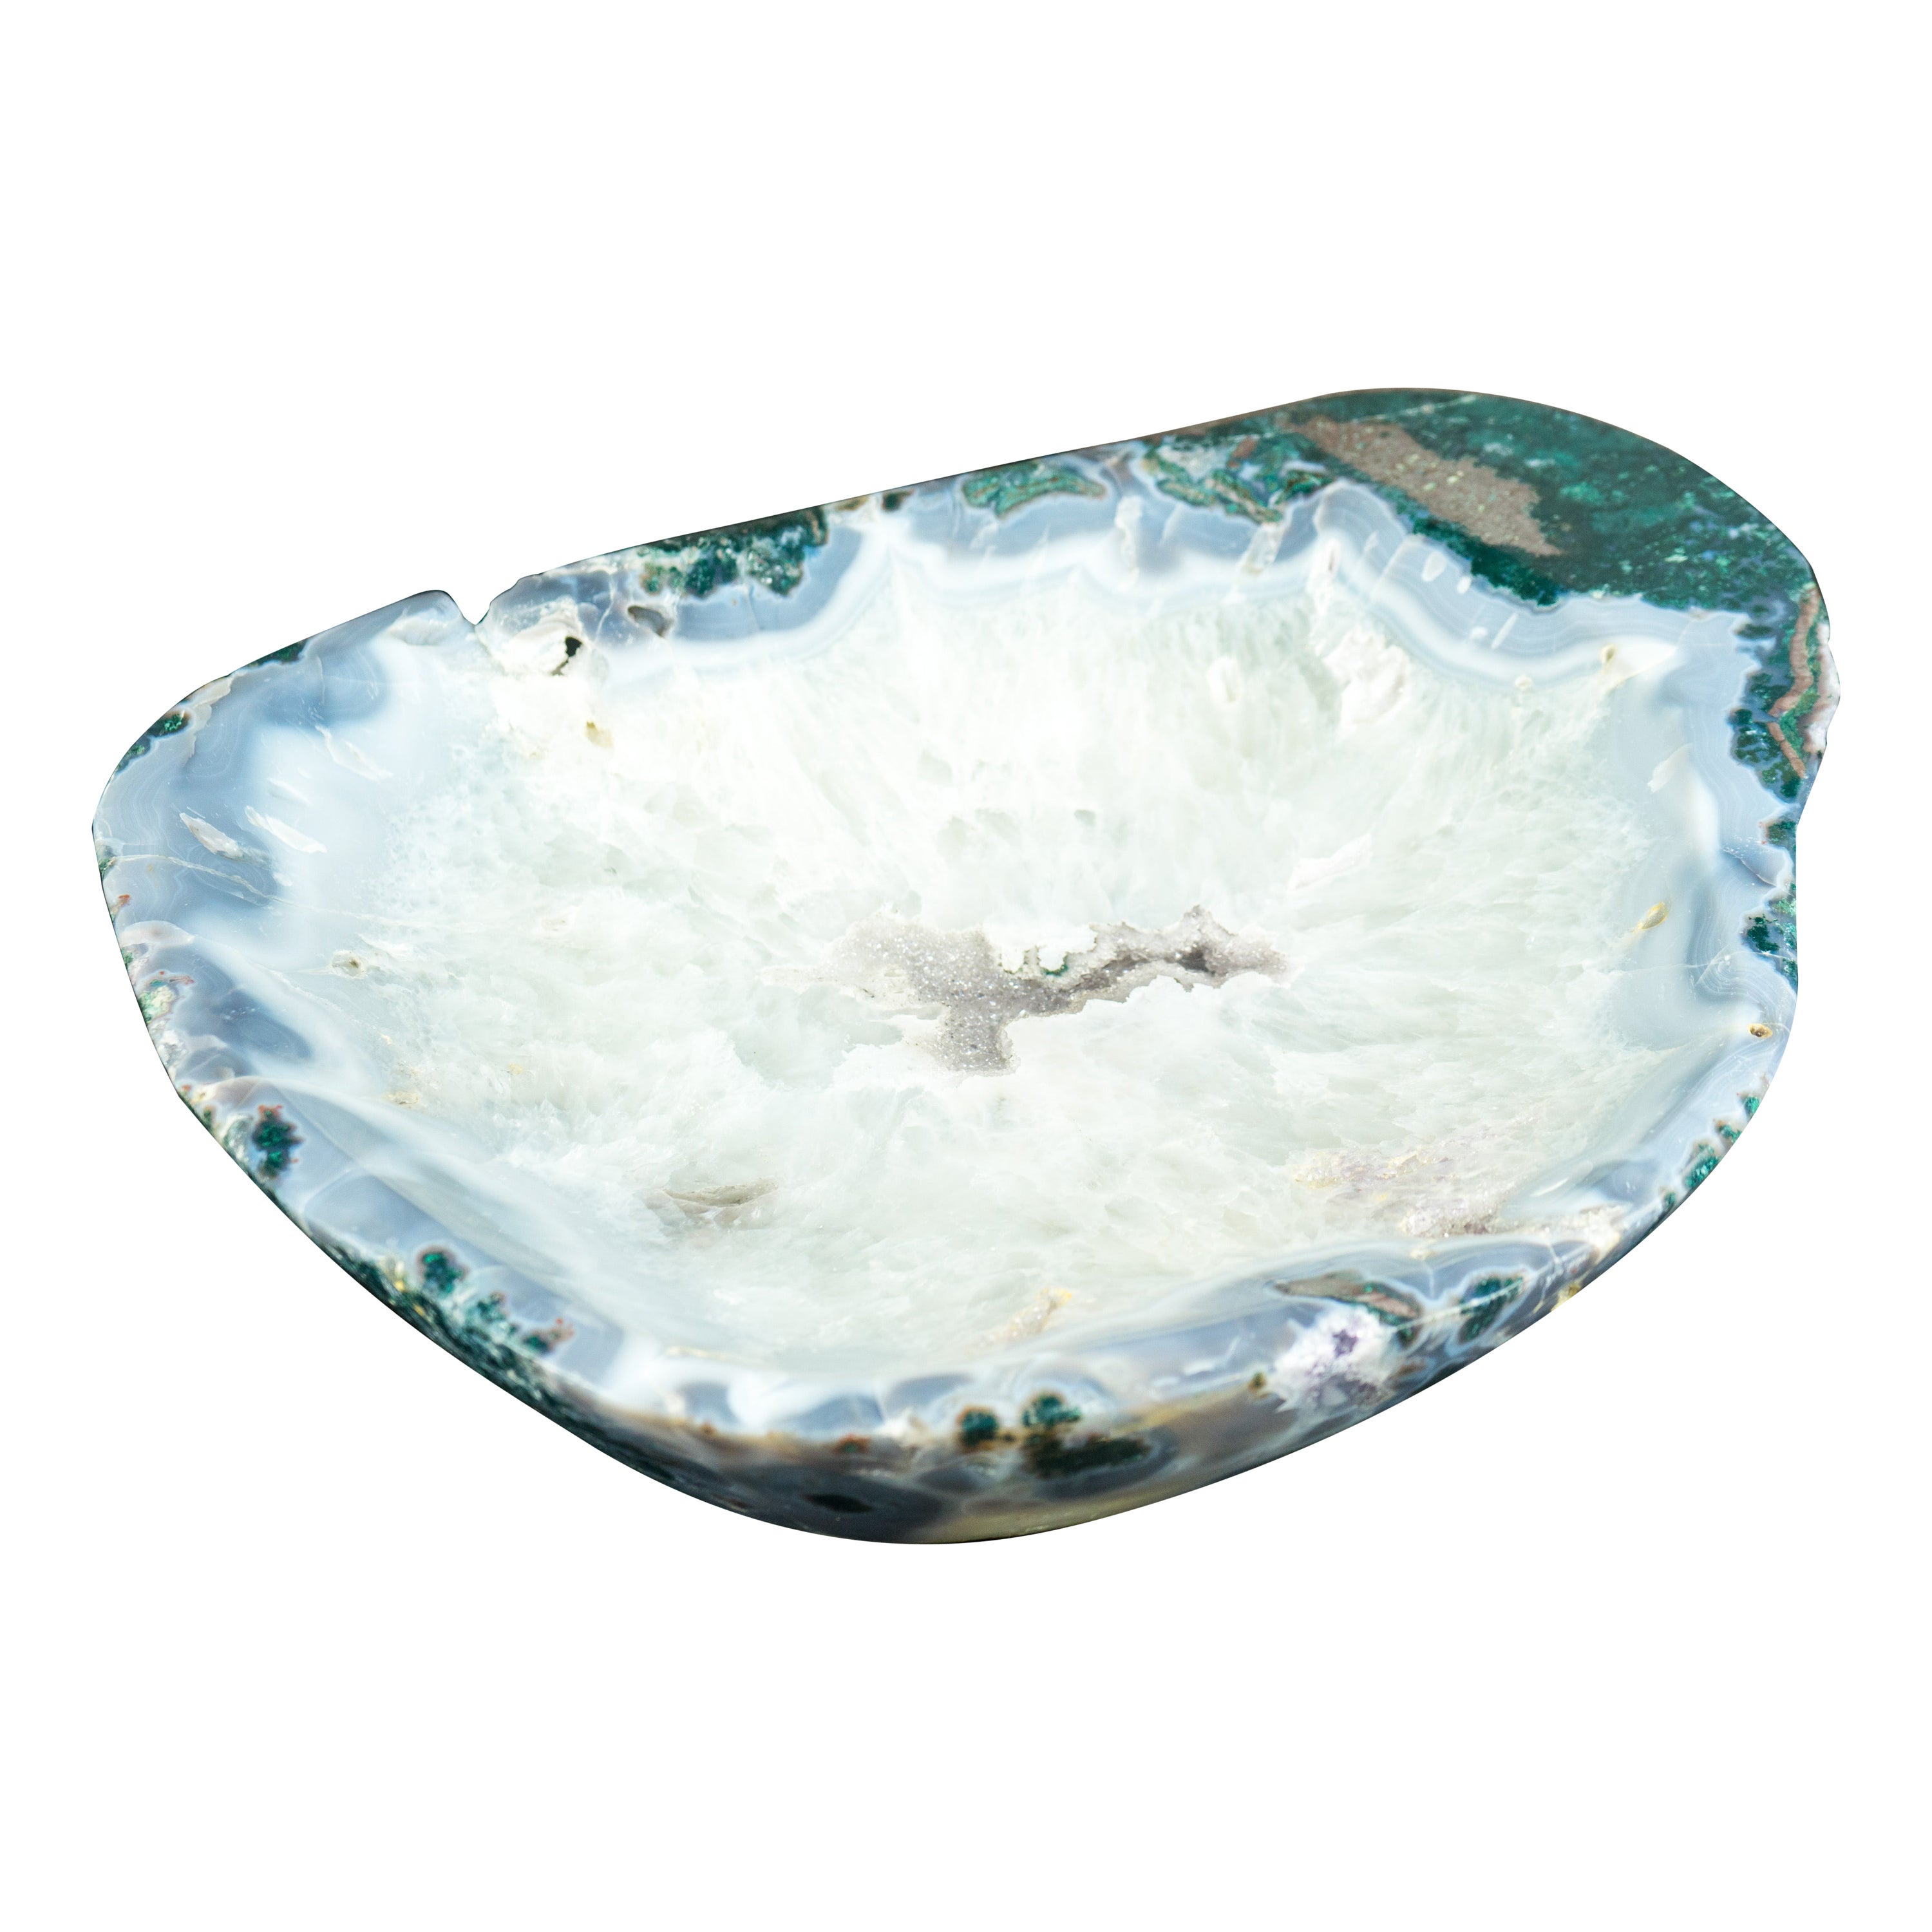 Natural Lace Agate with Amethyst and Rock Crystal Large Decorative Bowl For Sale